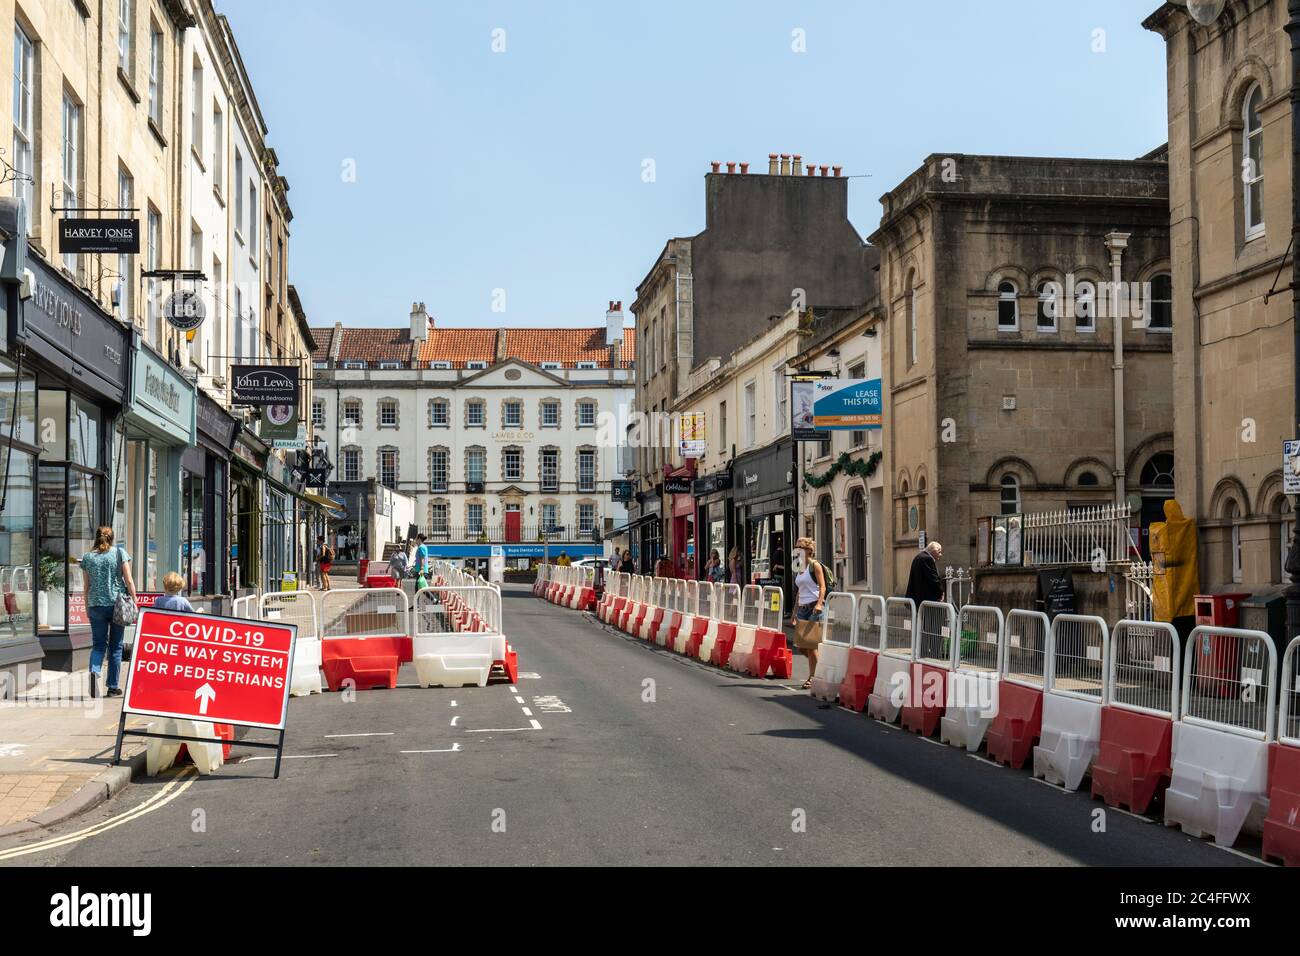 Covid 19 - One way system for pedestrians made by using street barriers to widen the pavements in Clifton Village for social distancing, Bristol, UK Stock Photo